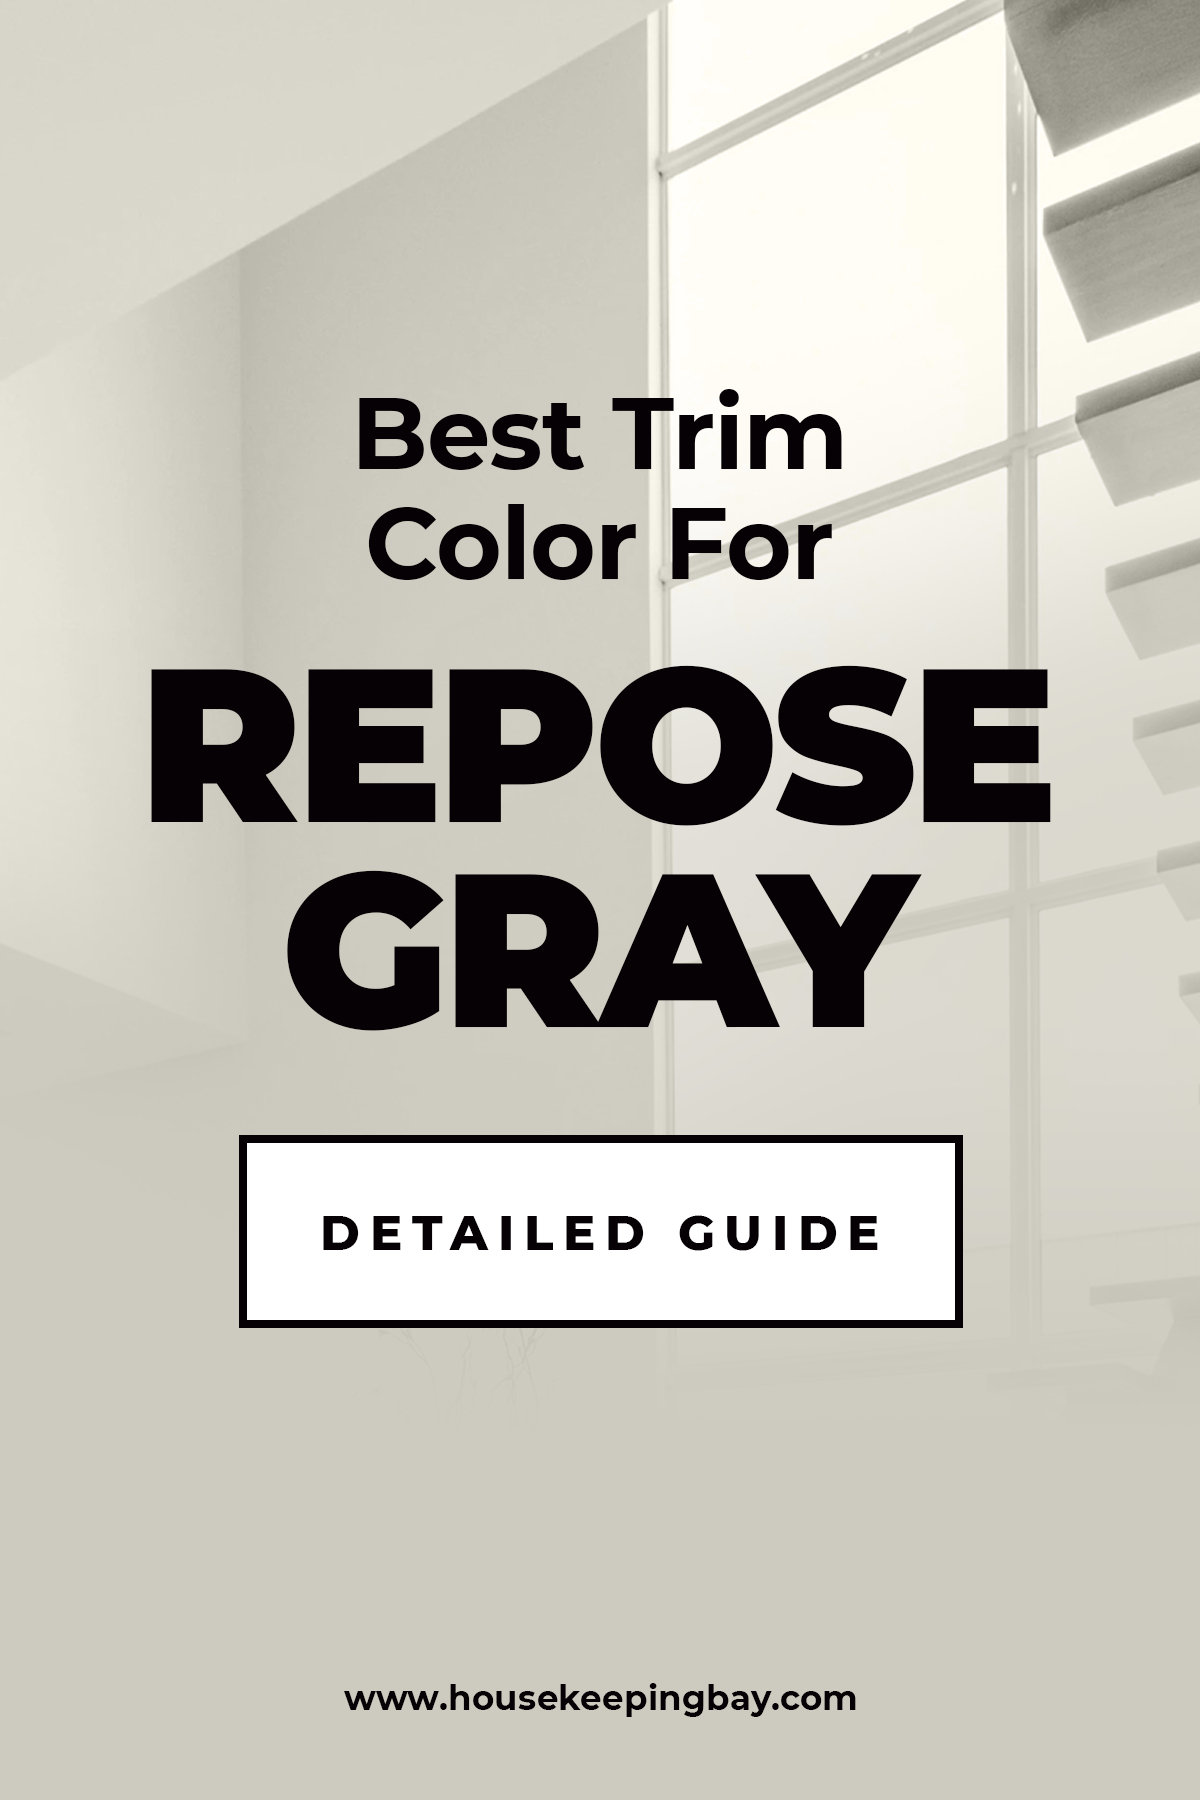 Best Trim Color For Repose Gray